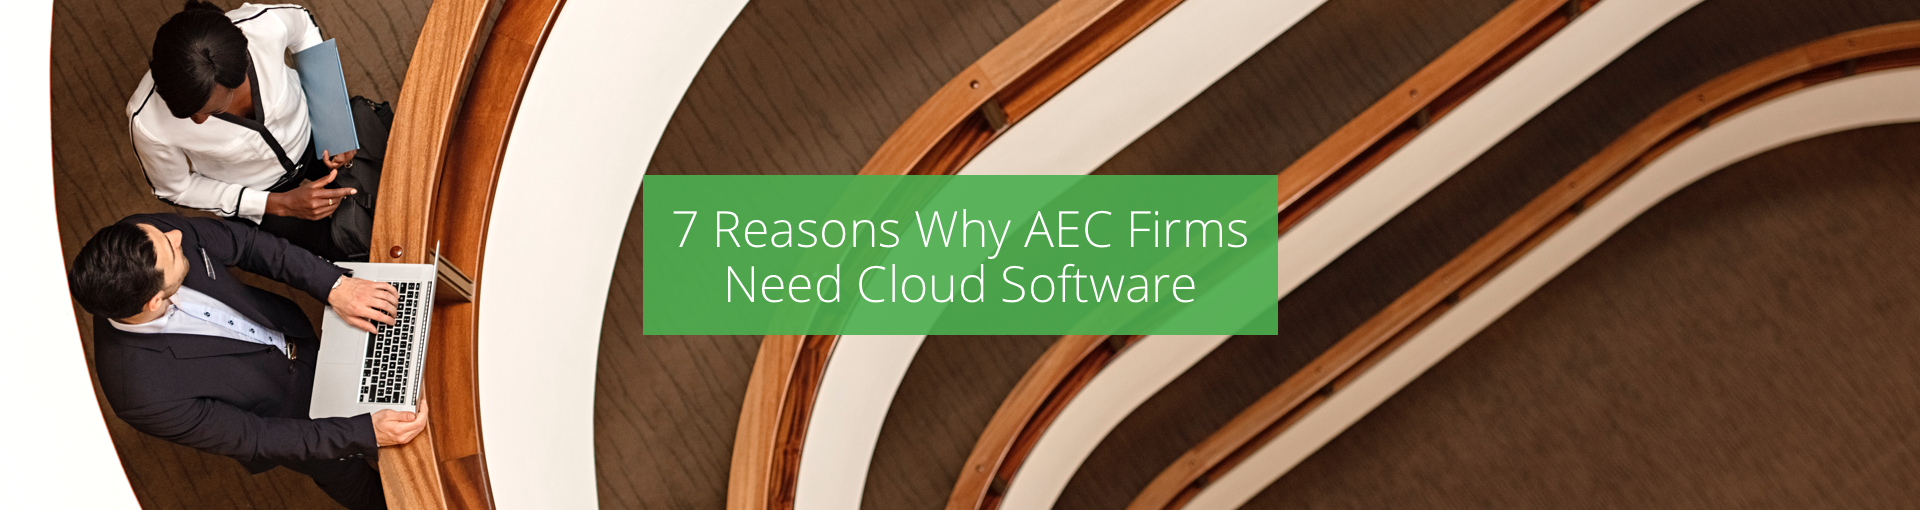 7 Reasons Why AEC Firms Need Cloud Software Featured Image